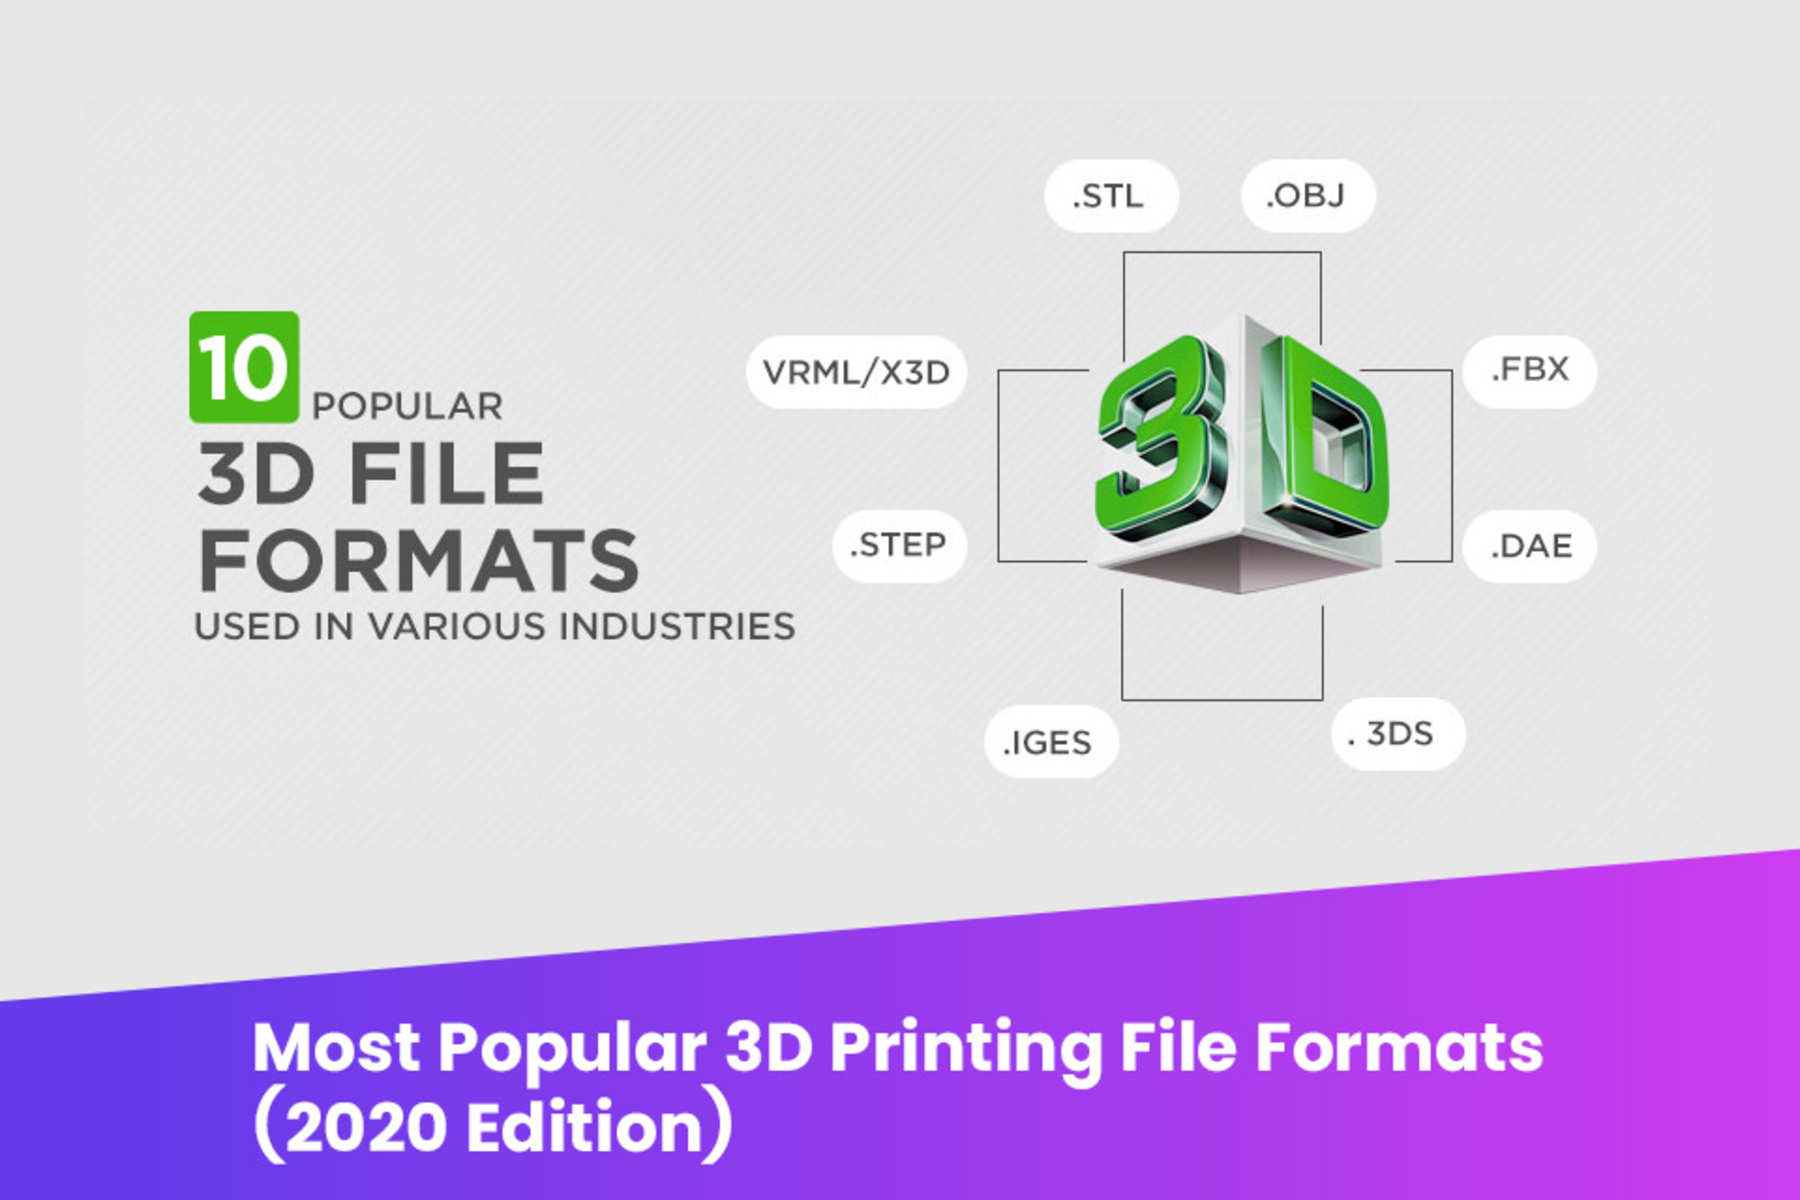 What Type Of File Is Used For 3D Printing